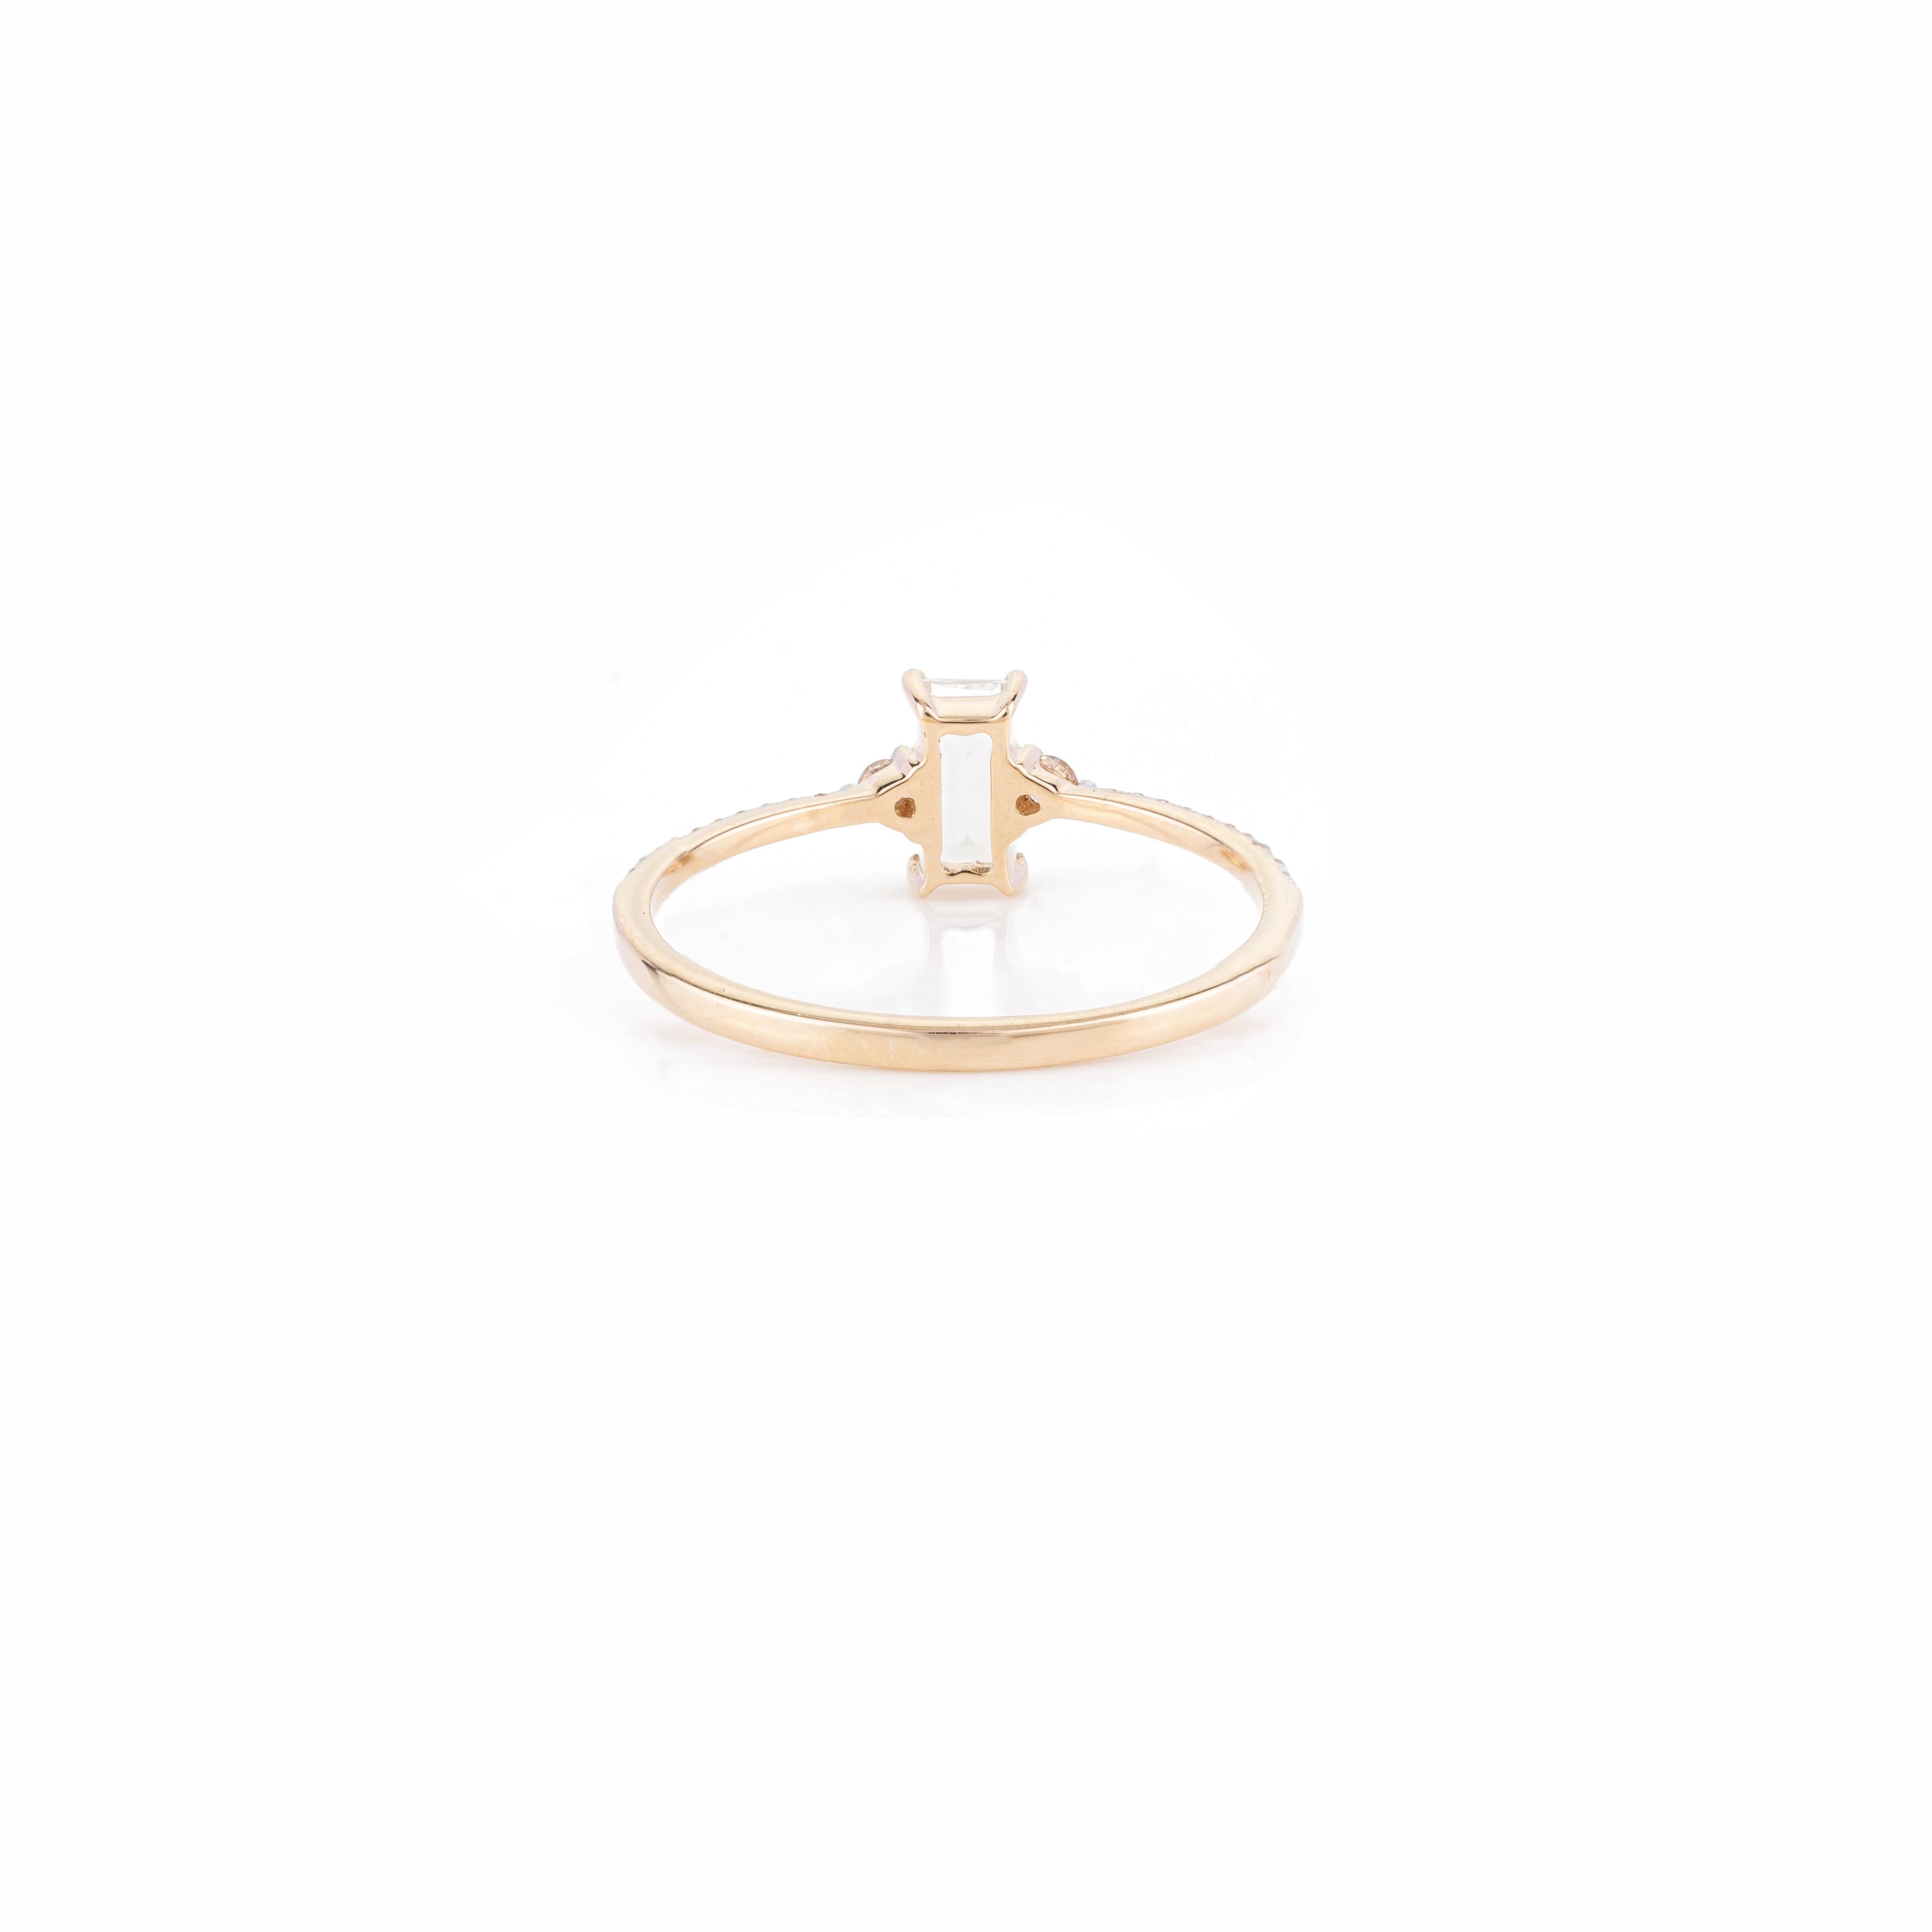 For Sale:  Dainty Baguette Moonstone Diamond Everyday Ring in 14k Solid Yellow Gold 7